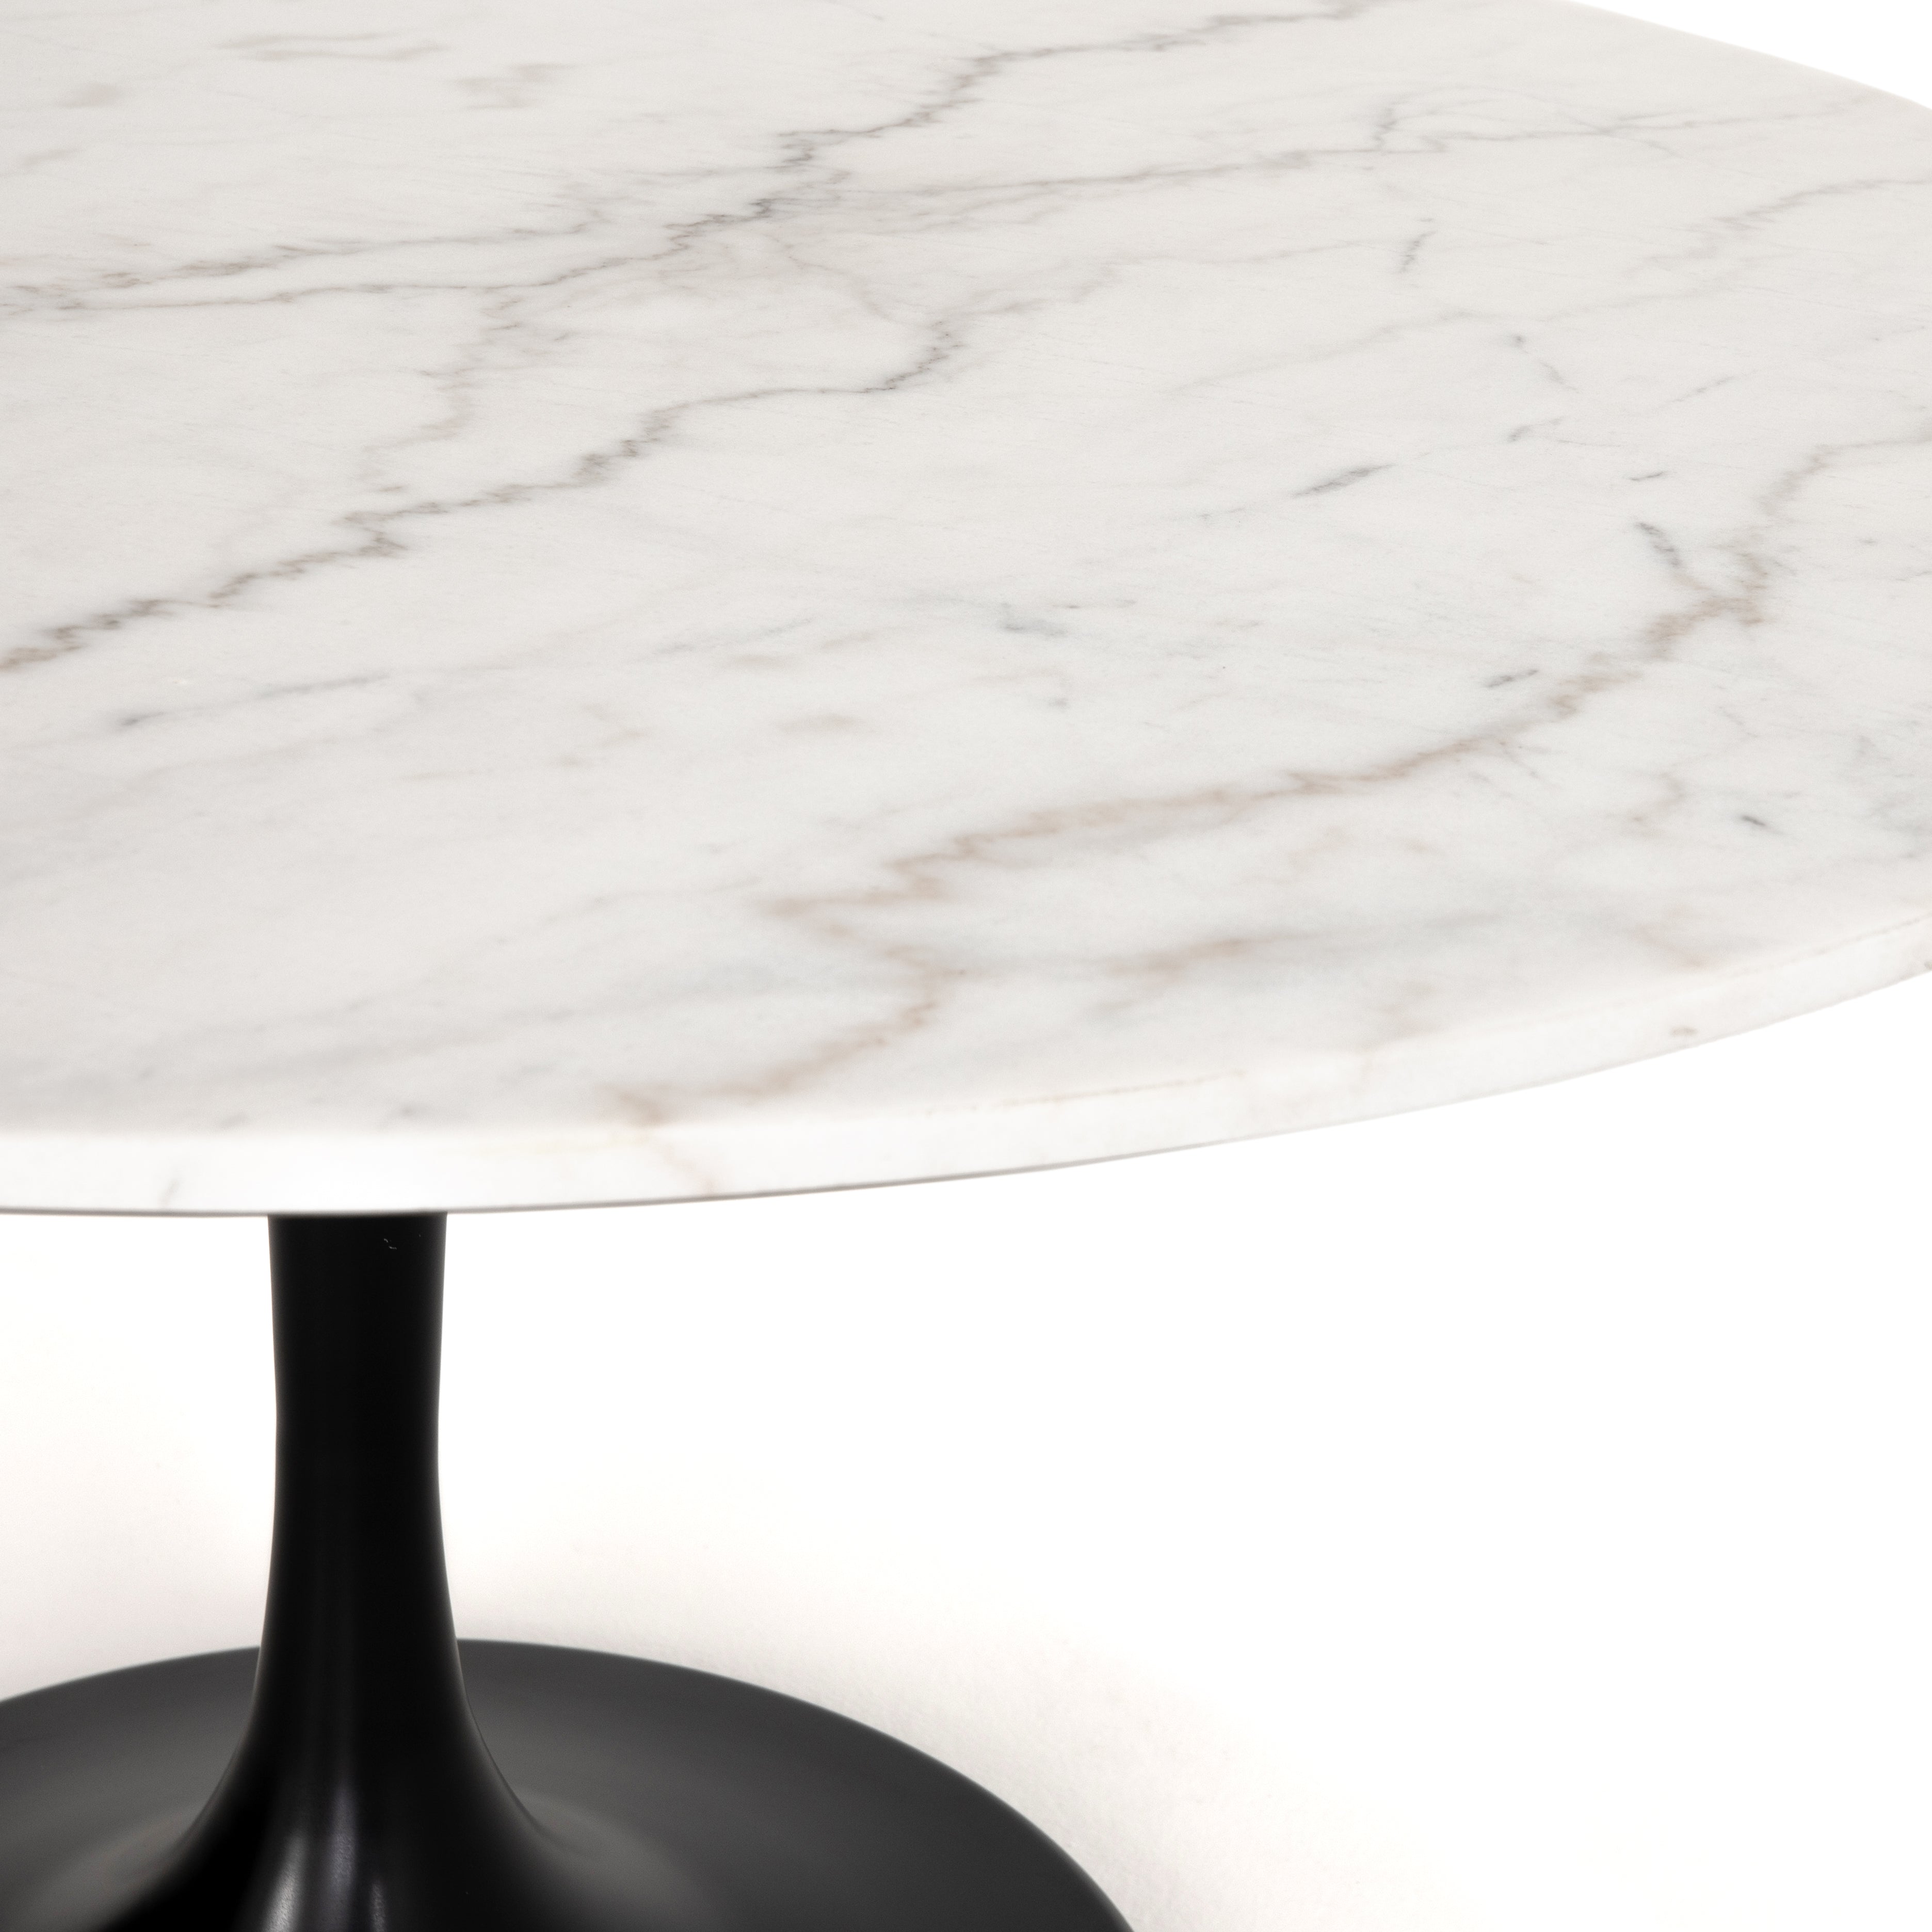 closeup of tabletop to show marble pattern